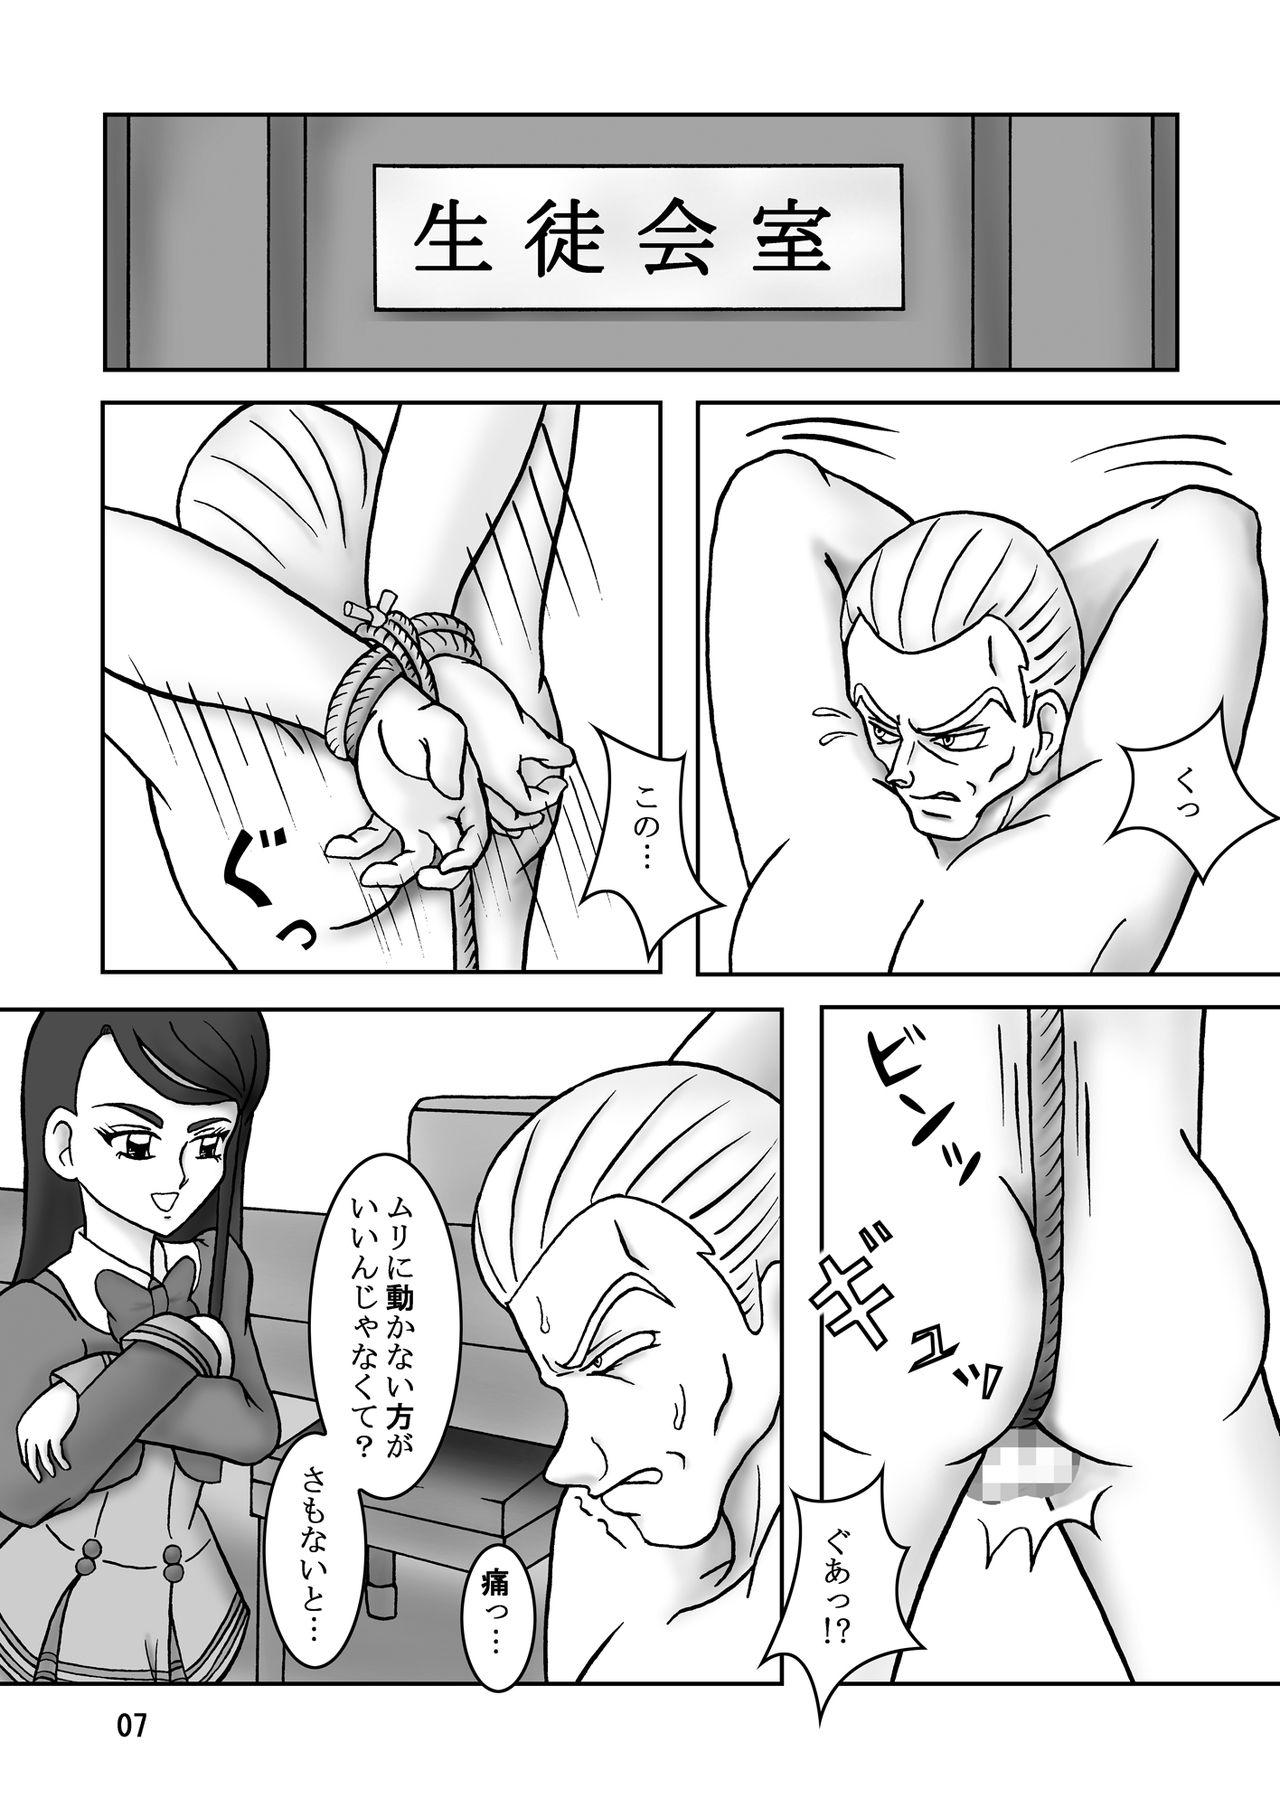 Freak Yes！ズリキュア5 - Yes precure 5 First Time - Page 9